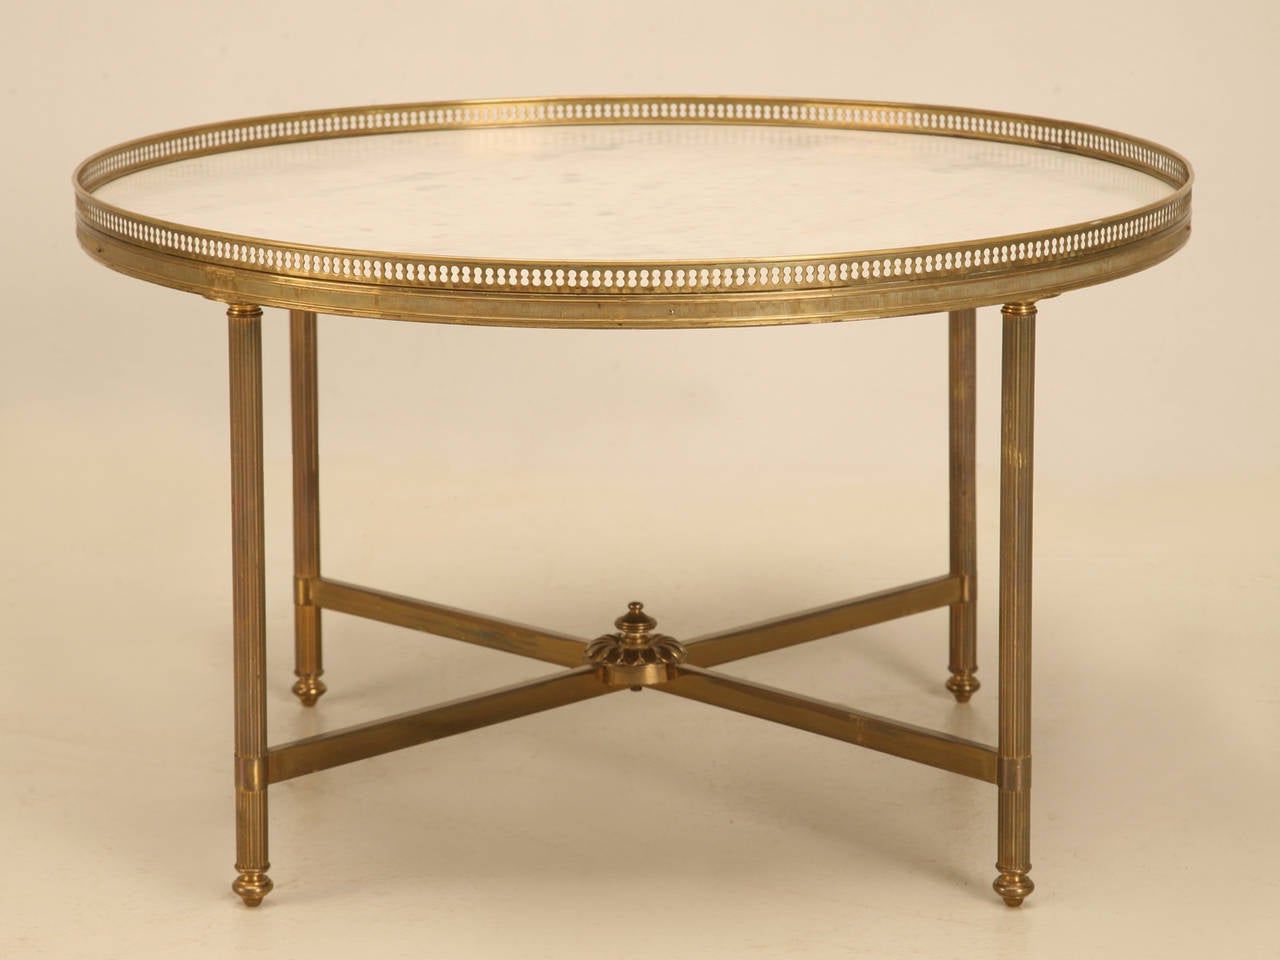 Vintage French Marble And Brass Cocktail Or Coffee Table Pertaining To Favorite Antique Brass Round Cocktail Tables (View 8 of 20)